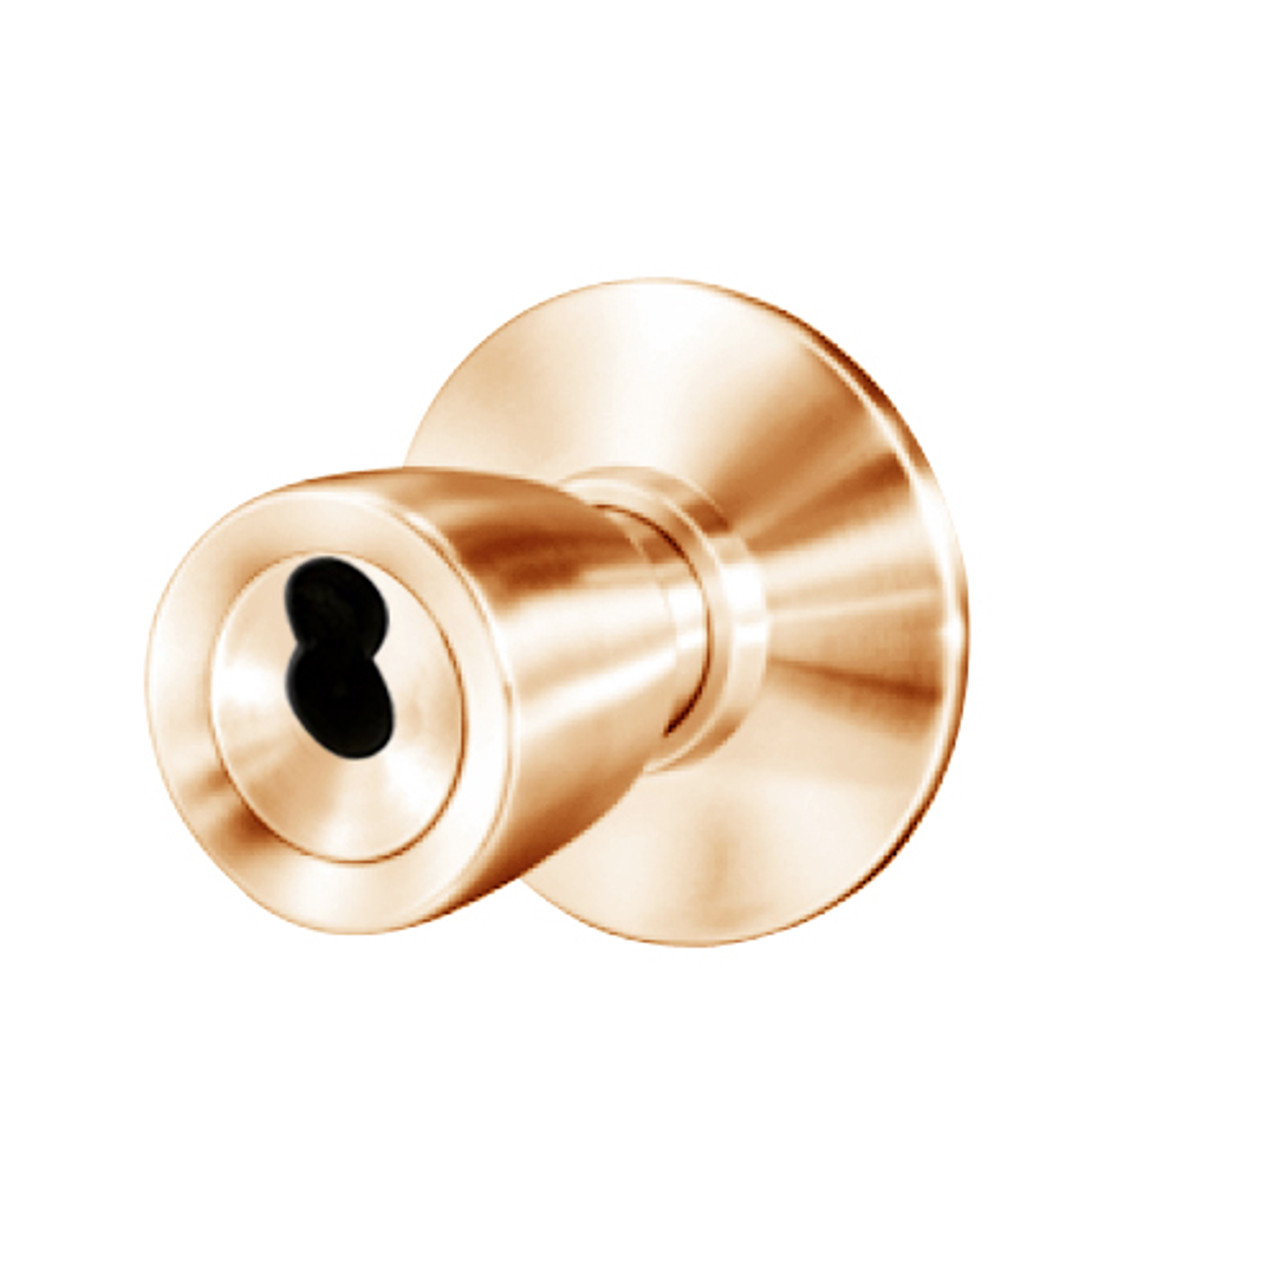 8K47S6DS3612 Best 8K Series Communicating Heavy Duty Cylindrical Knob Locks with Tulip Style in Satin Bronze